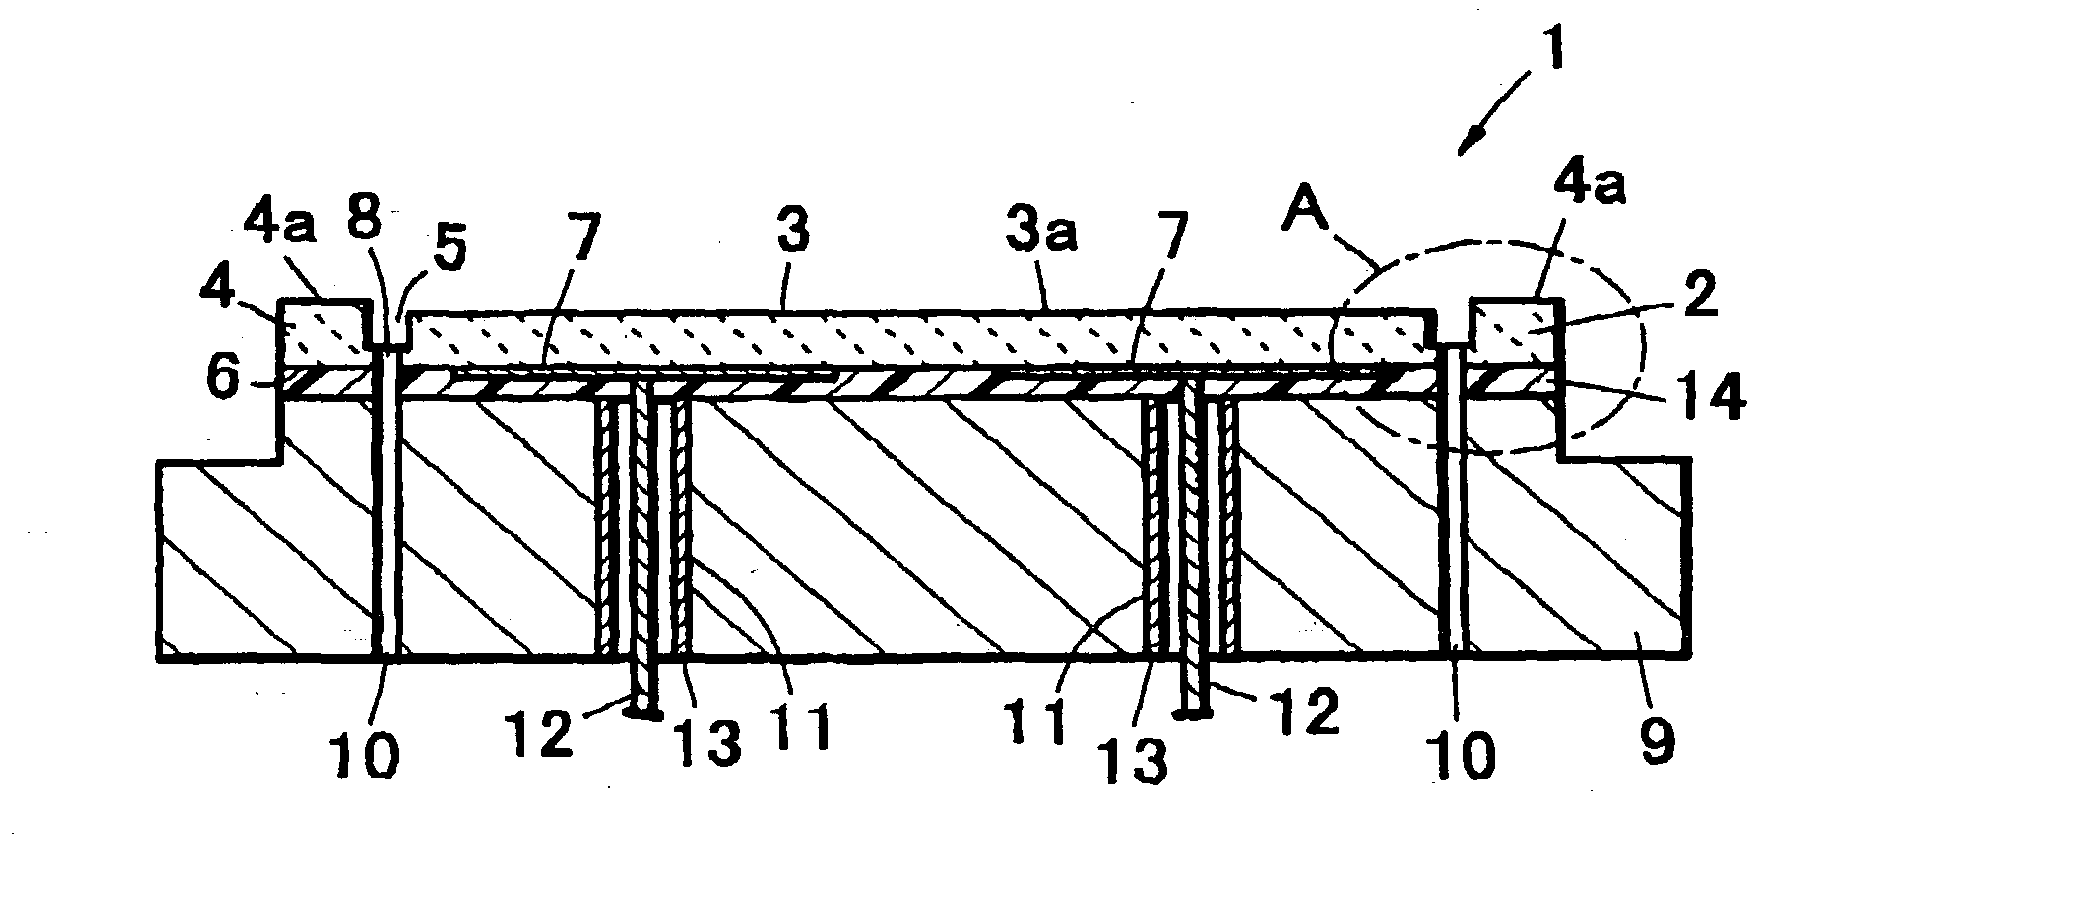 Electrostatic chuck for holding wafer